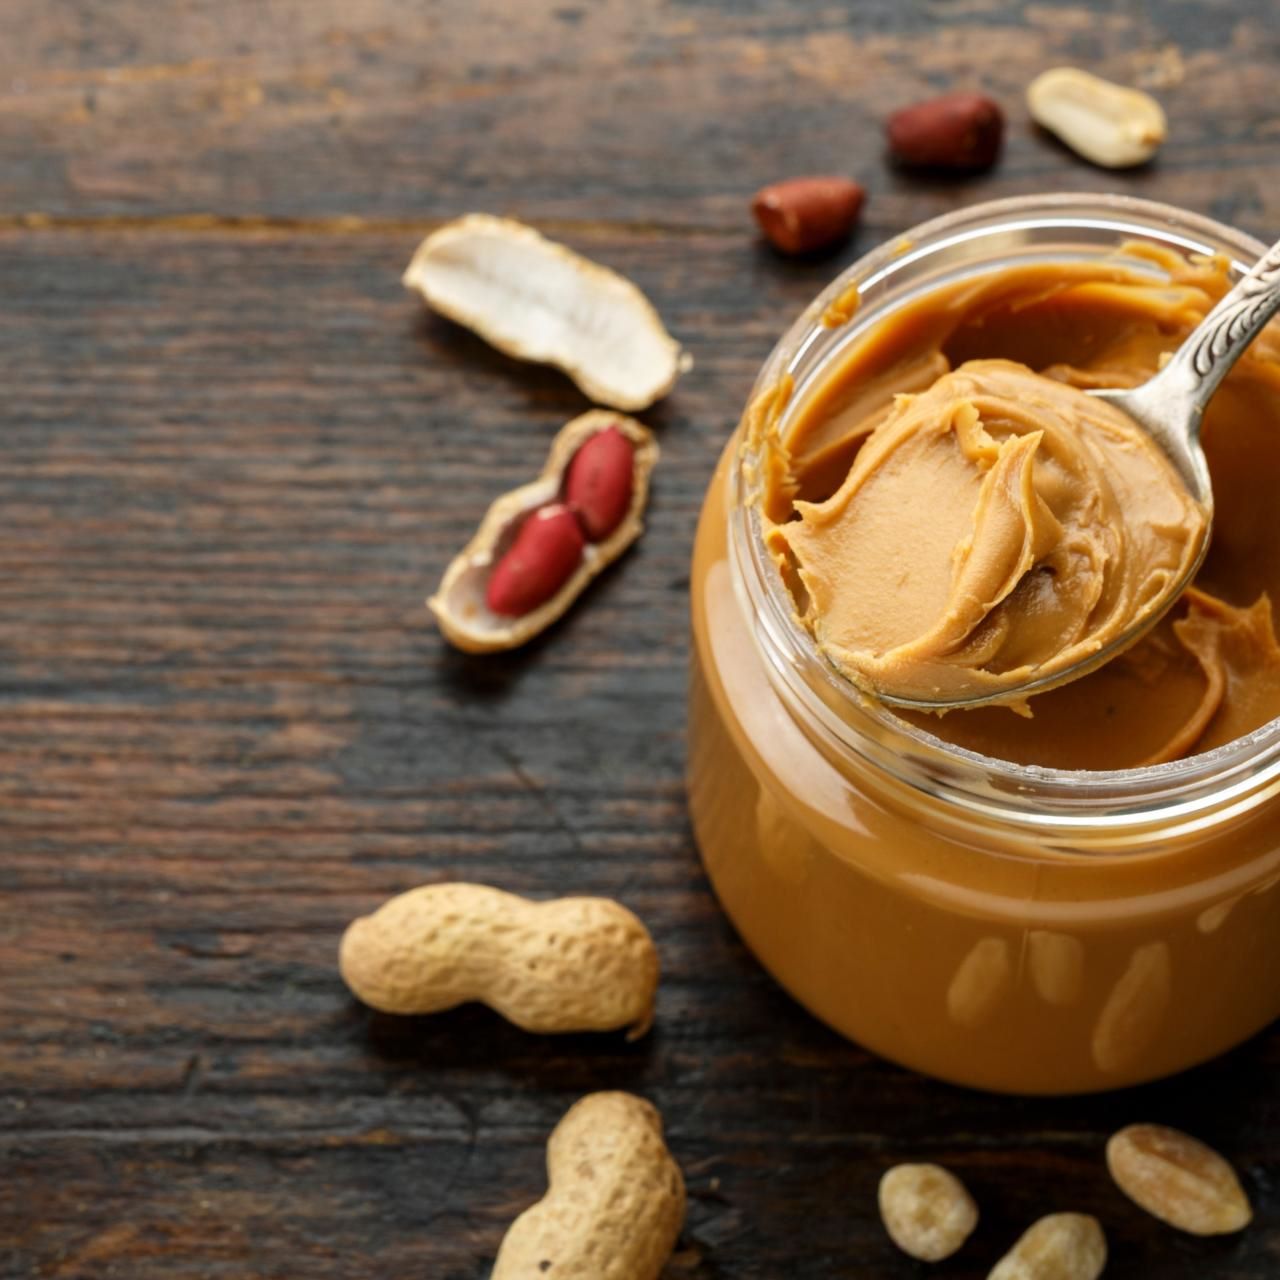 How To Store Homemade Peanut Butter